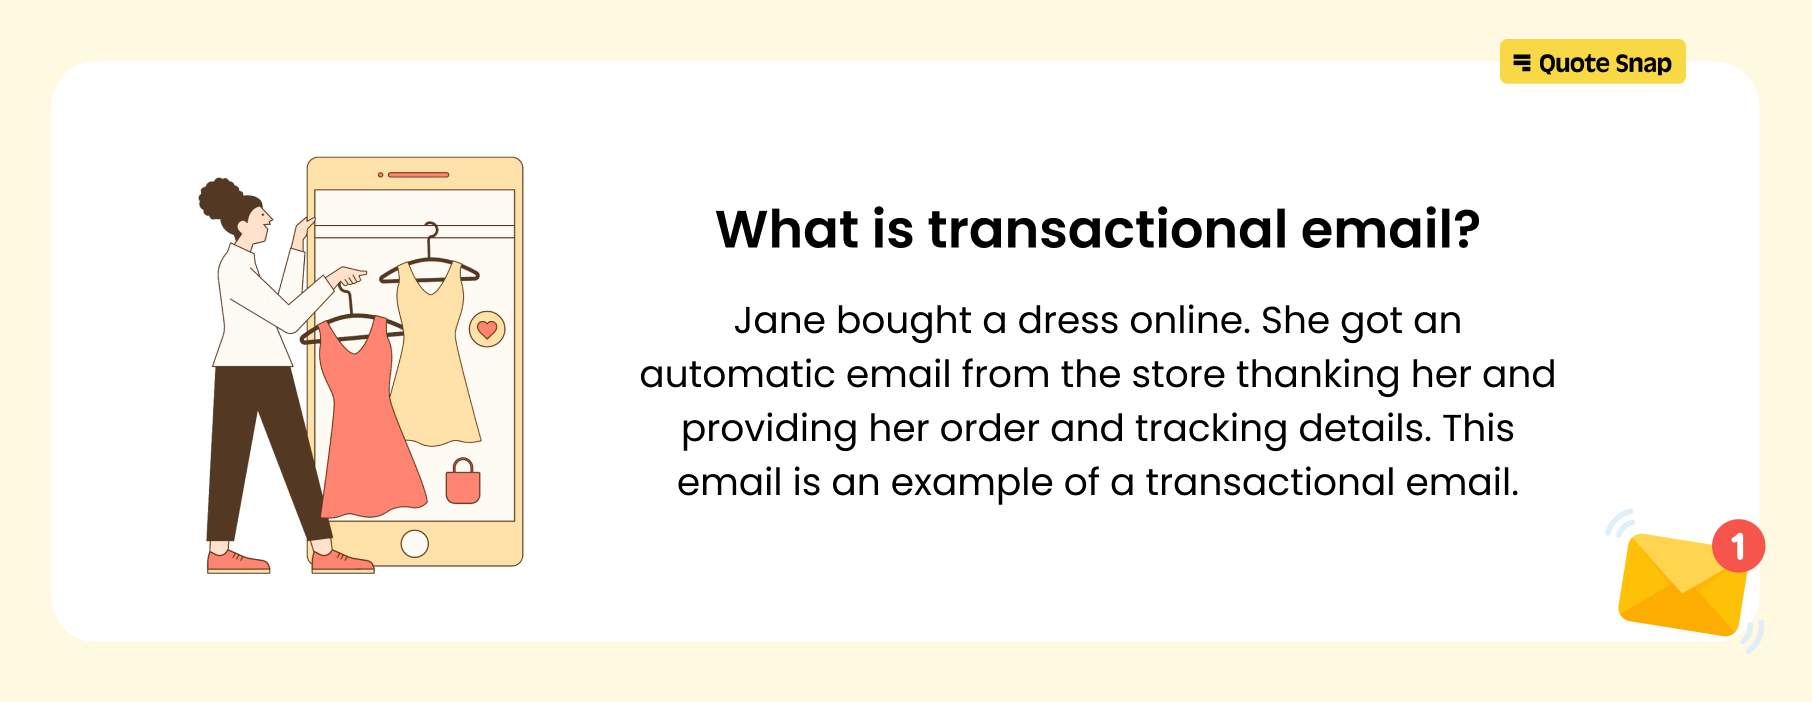 What is transactional email?